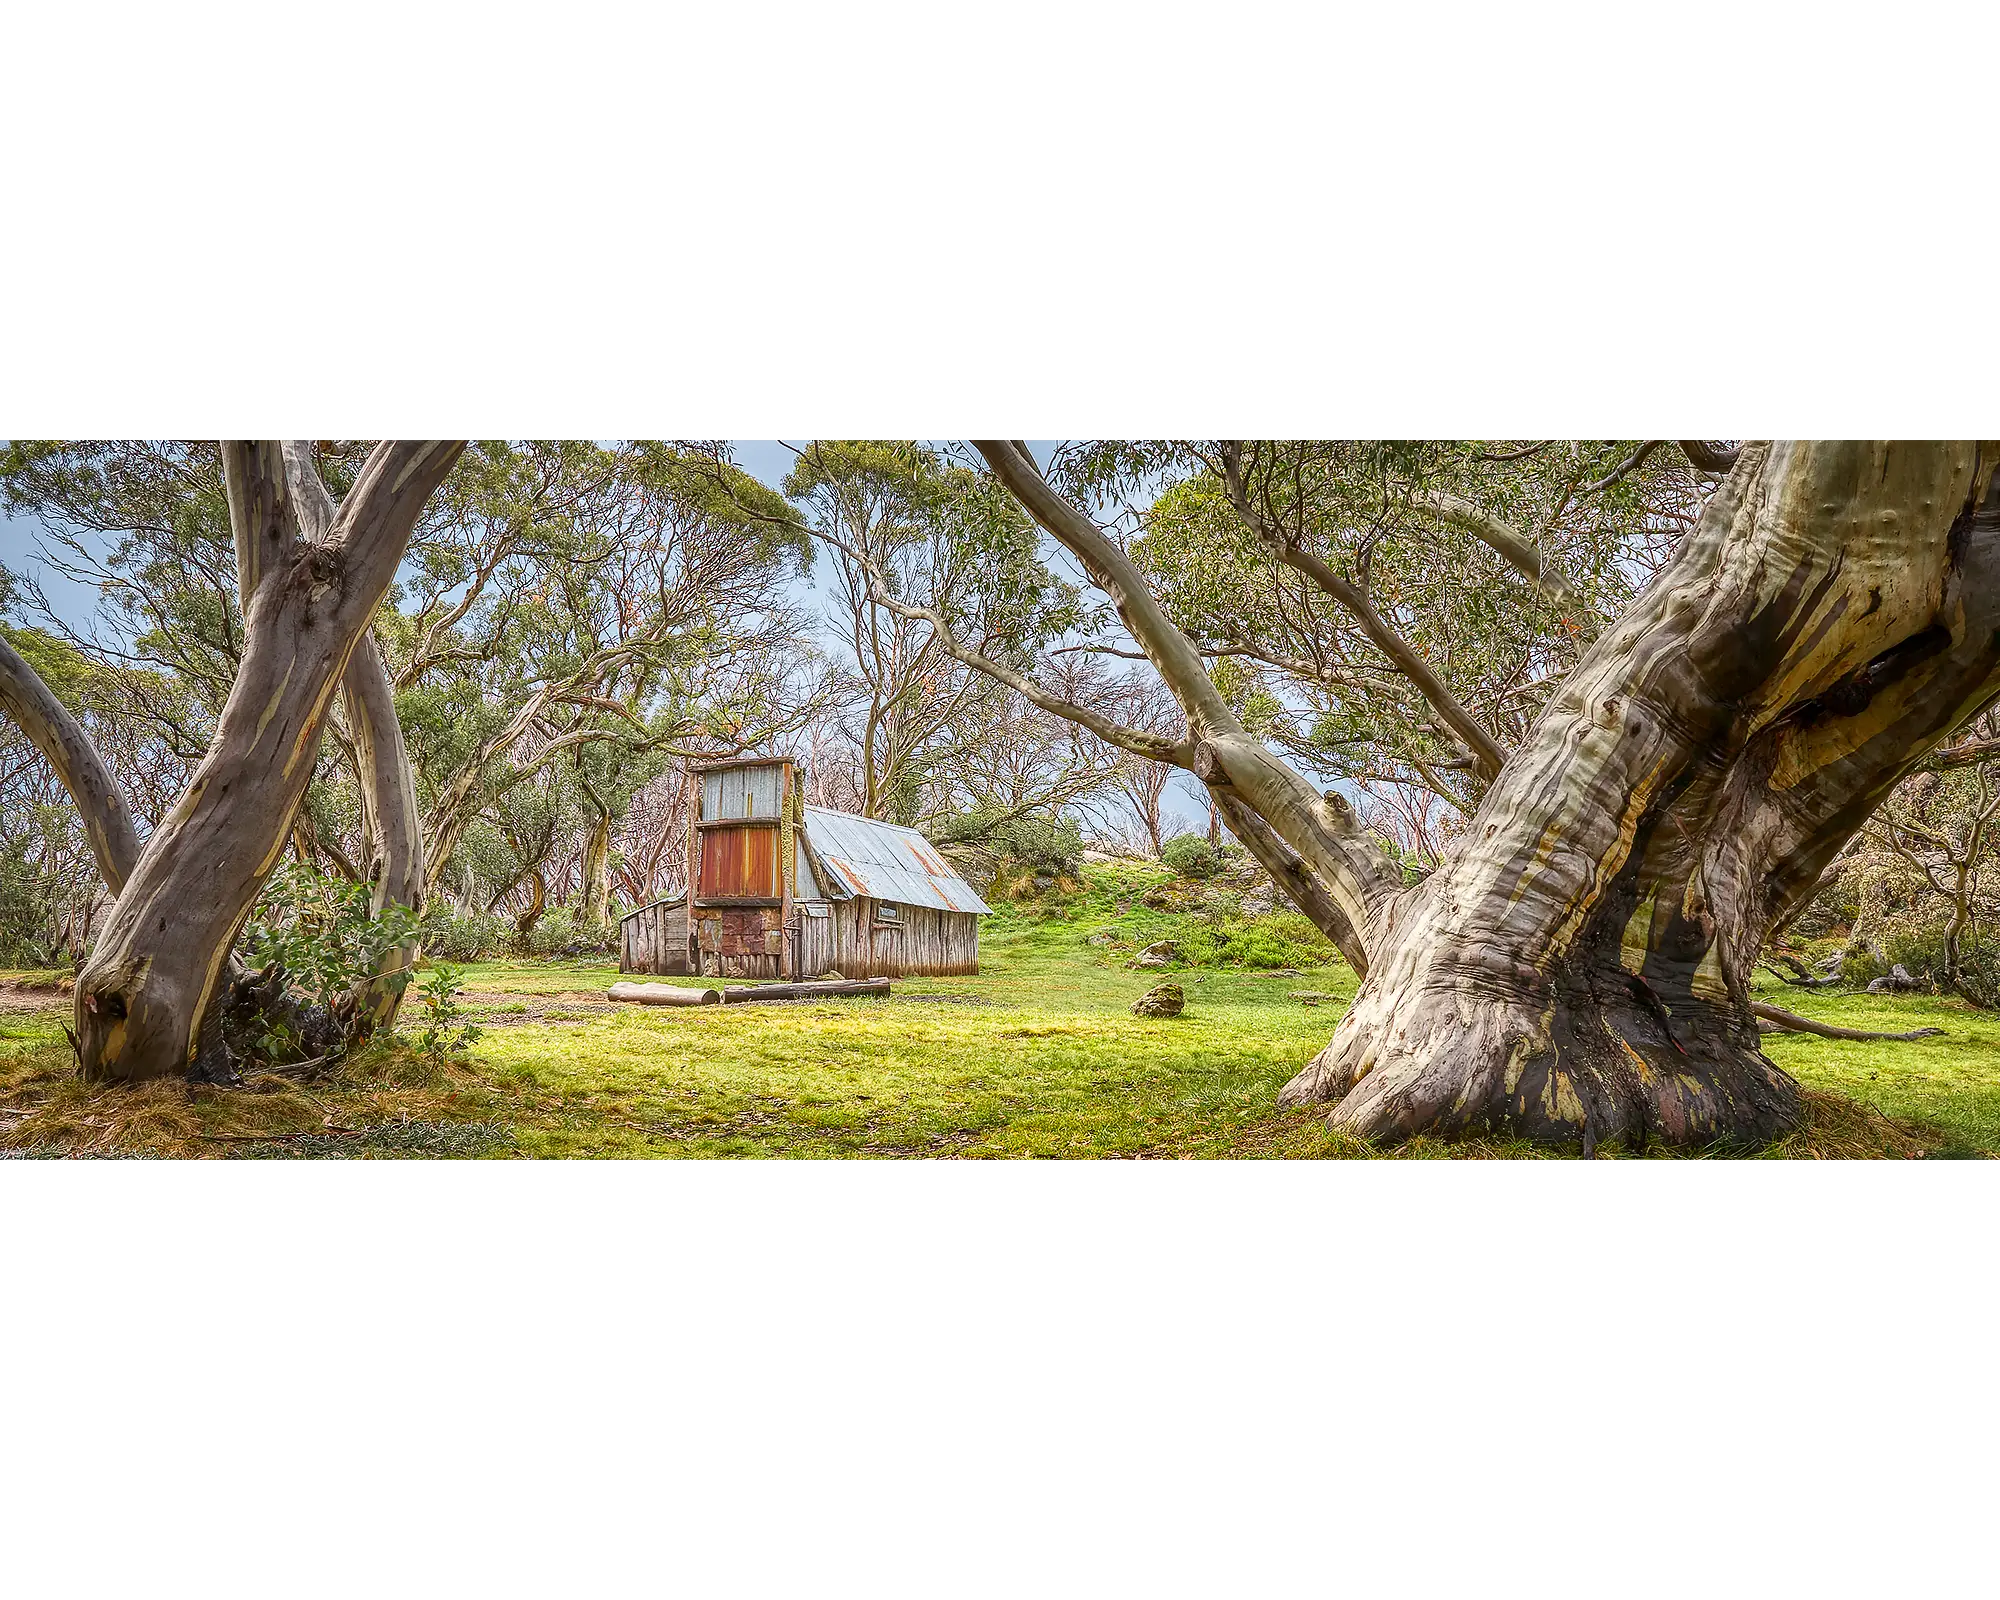 Wallace's Hut amongst snow gums in the Alpine National Park, Victoria.